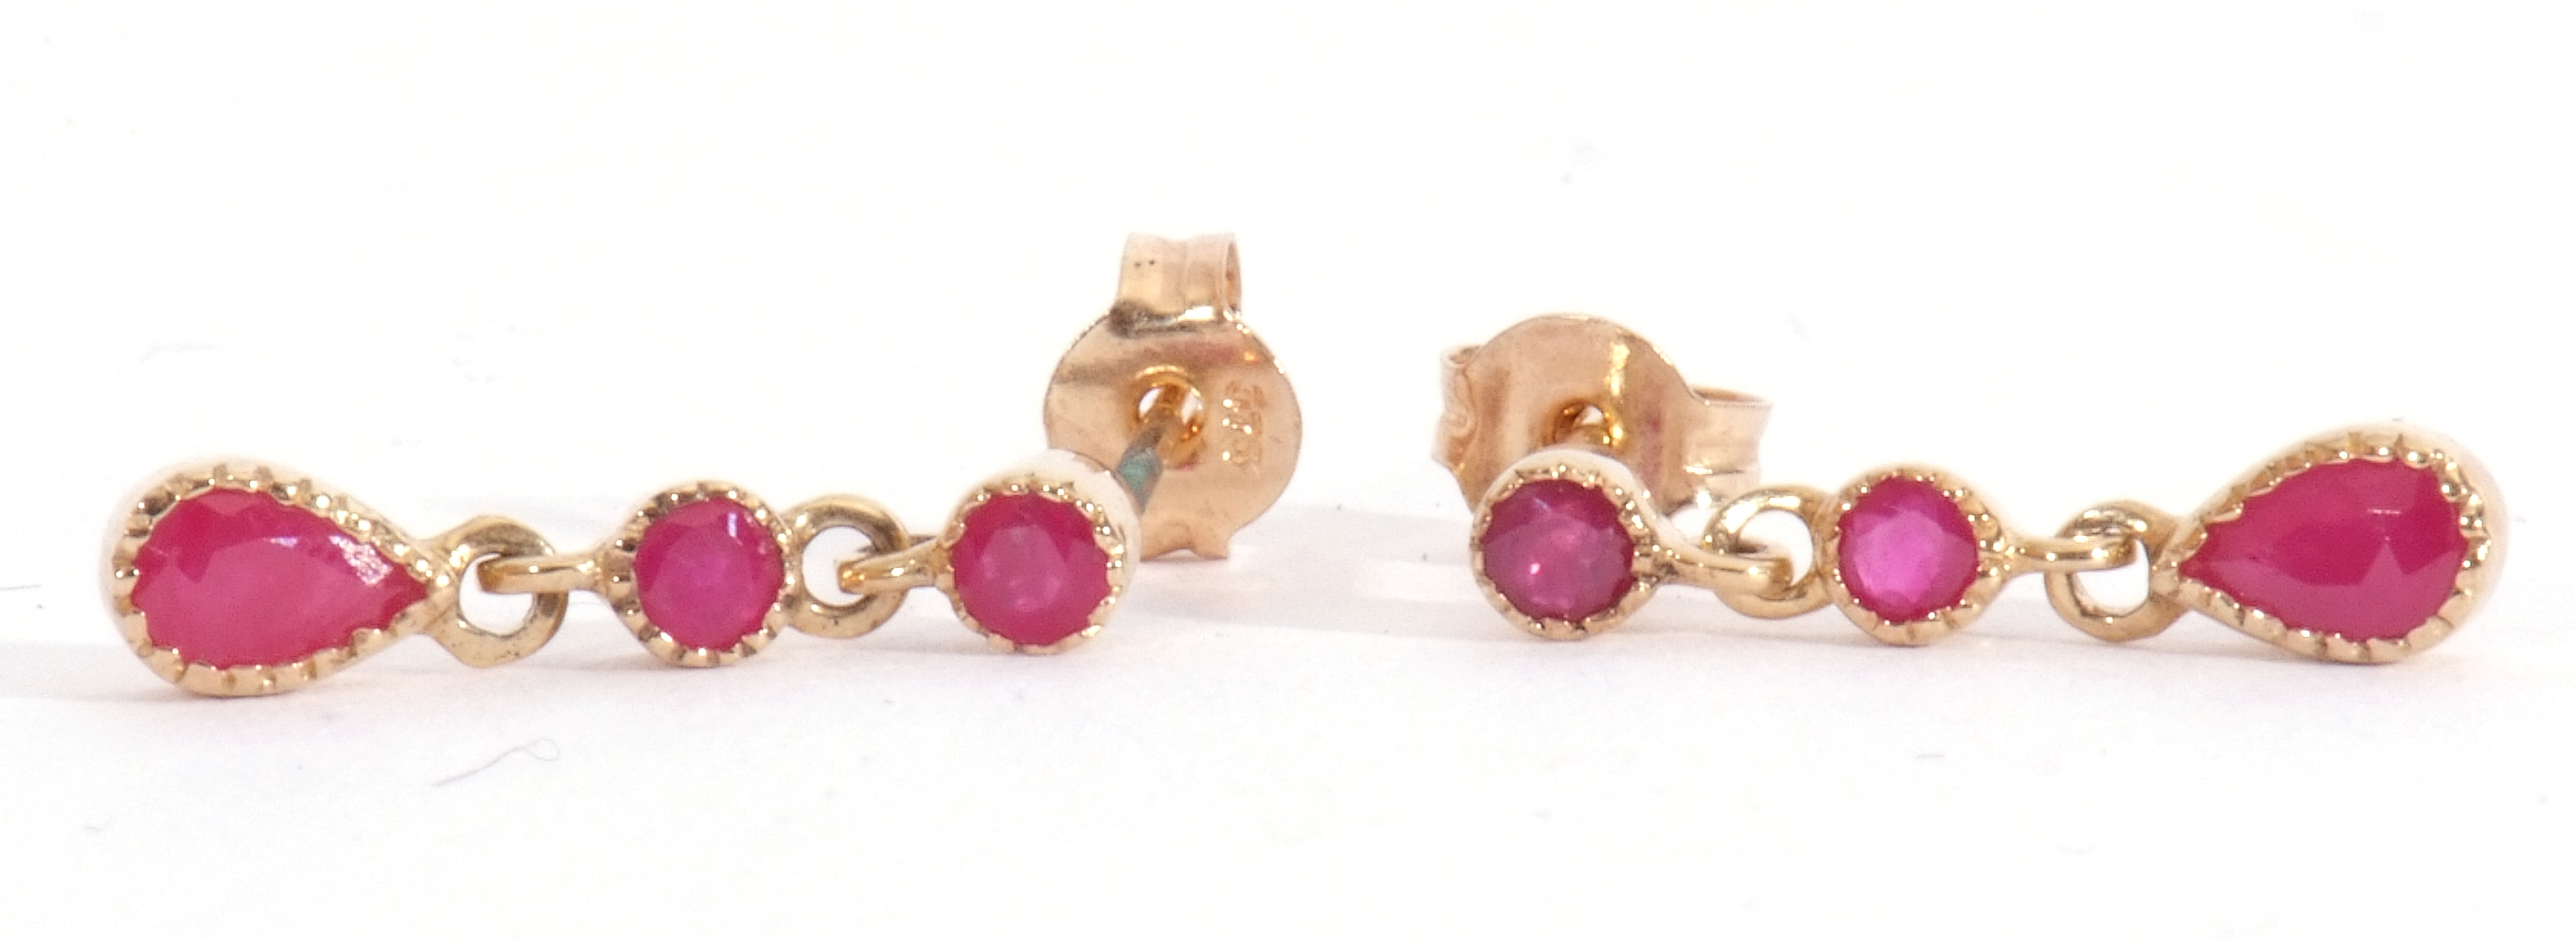 Pair of ruby drop earrings, a design featuring two round cut rubies with an oval ruby - Image 2 of 4